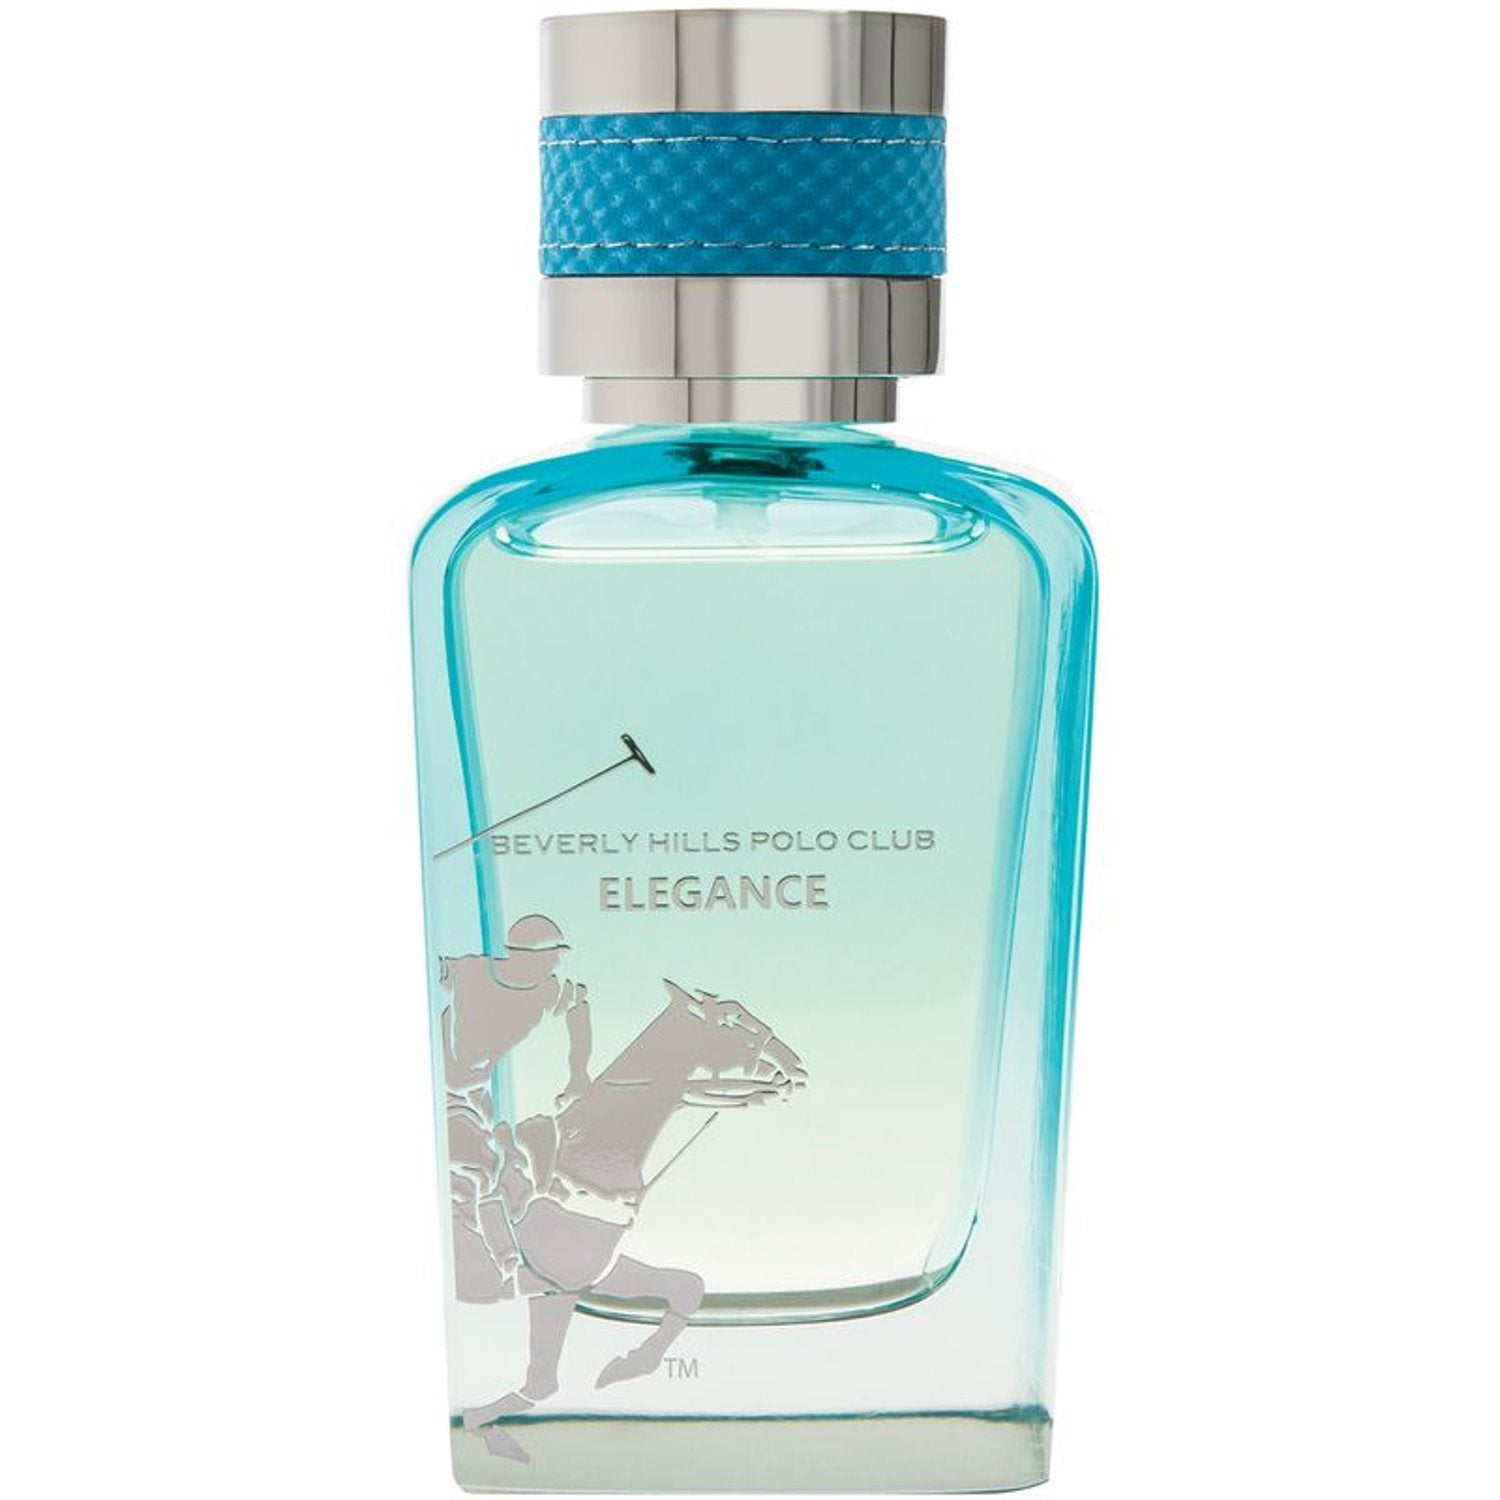 Beverly Hills Polo Club Elegance Perfume | Fragrance for Women | Personal Care Accessories in Bahrain | Halabh